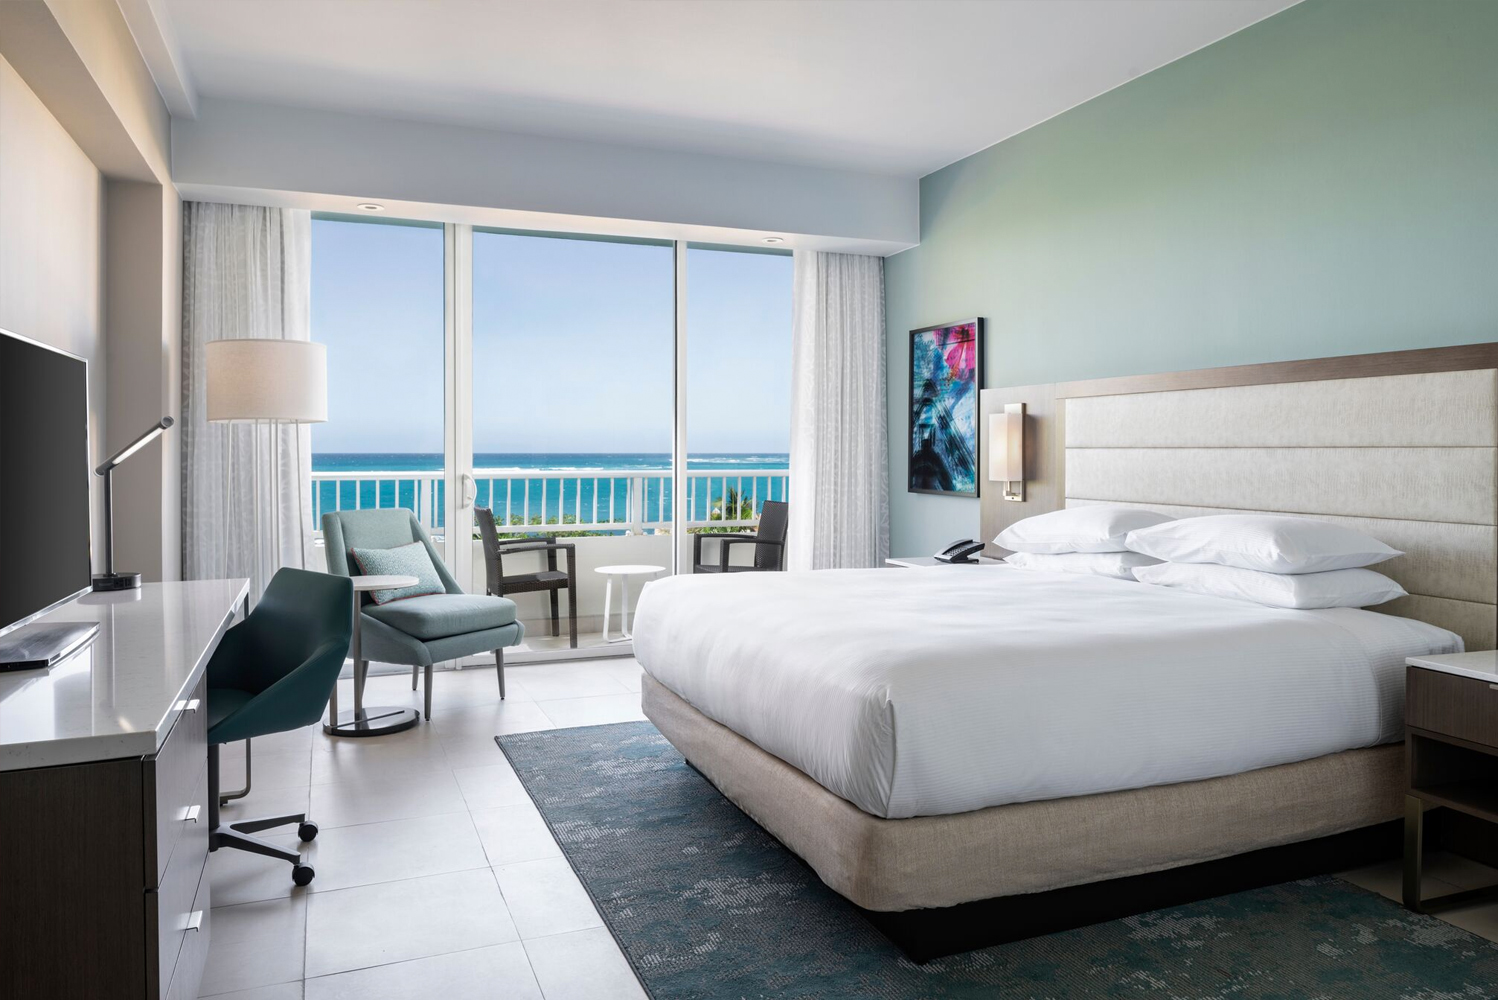 San Juan Puerto Ricos Caribe Hilton completed a more than 150 million restoration following a 15-month closure